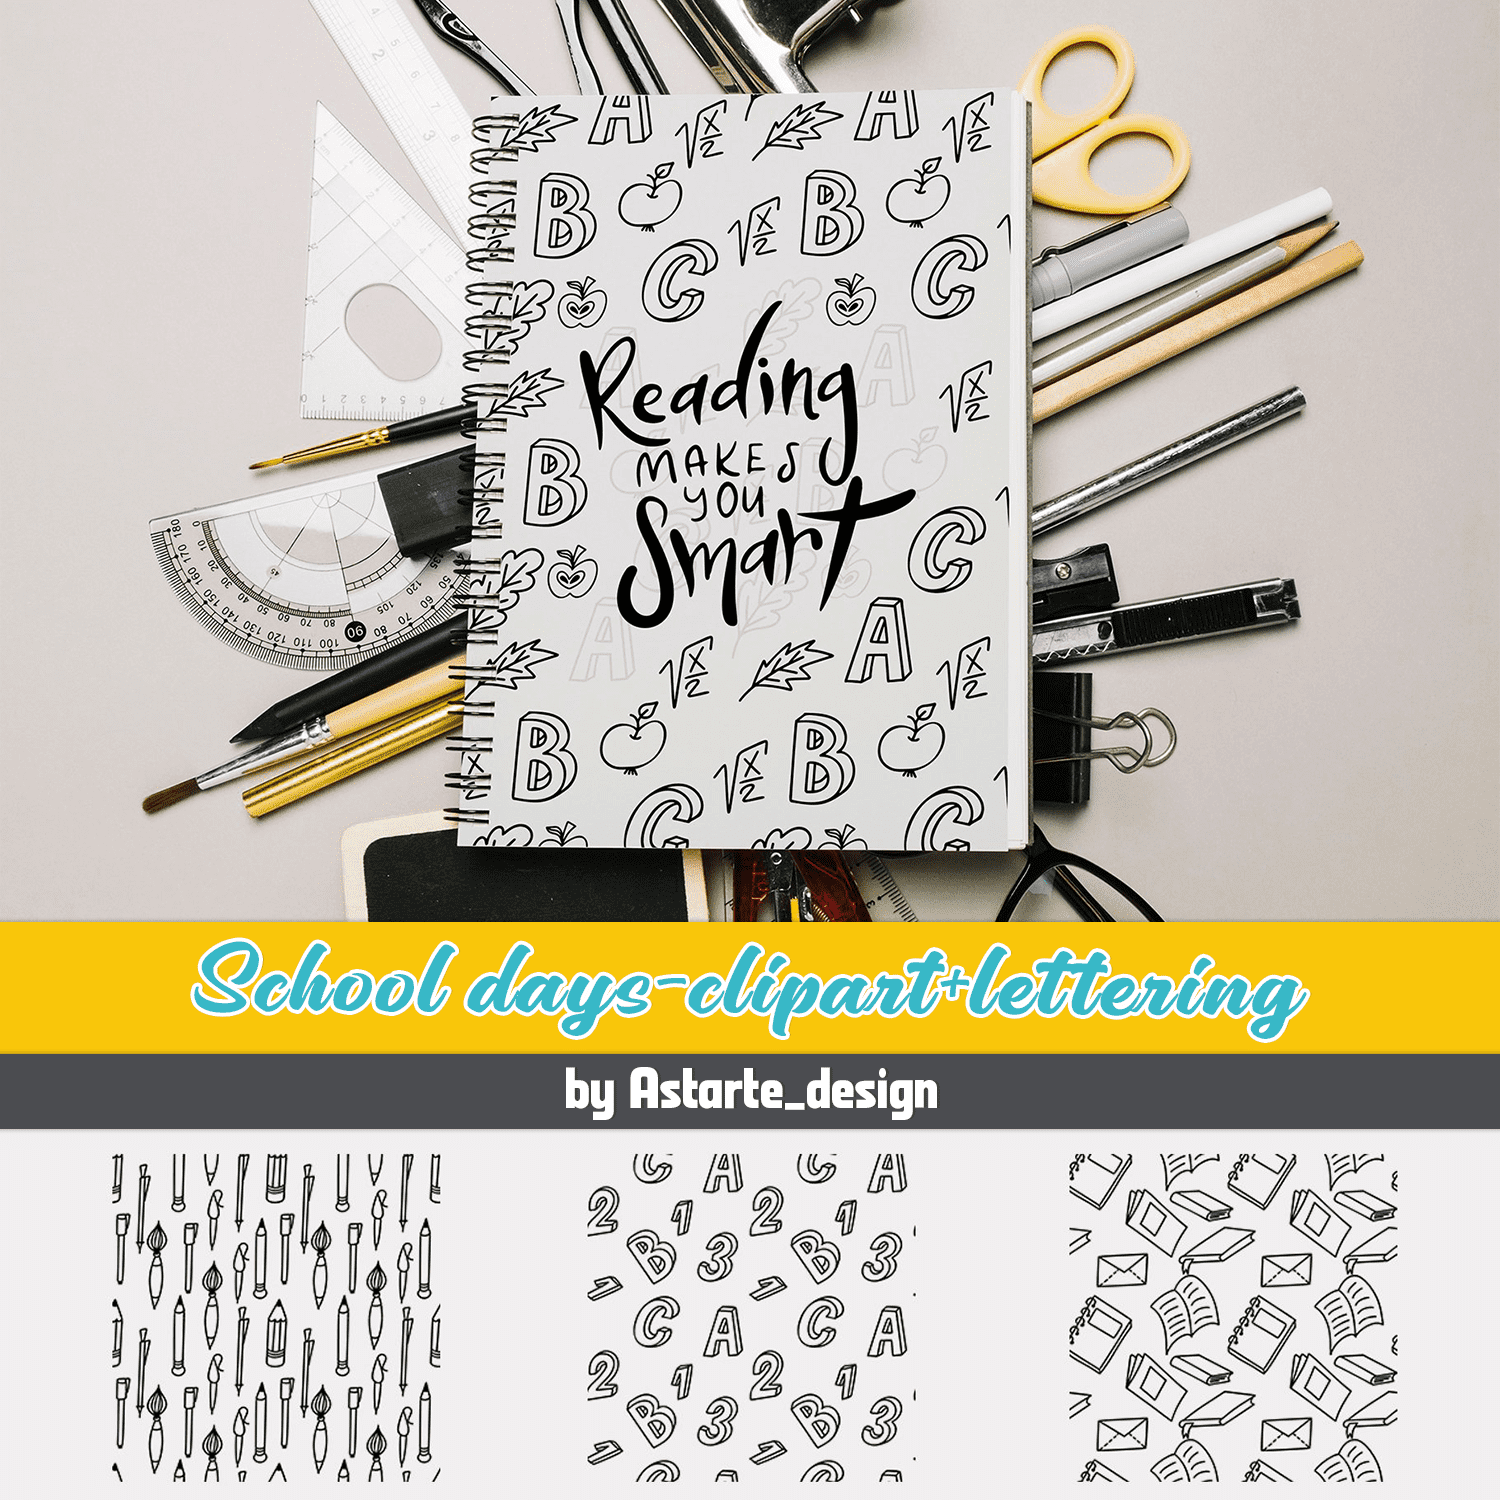 School days-clipart+lettering cover.